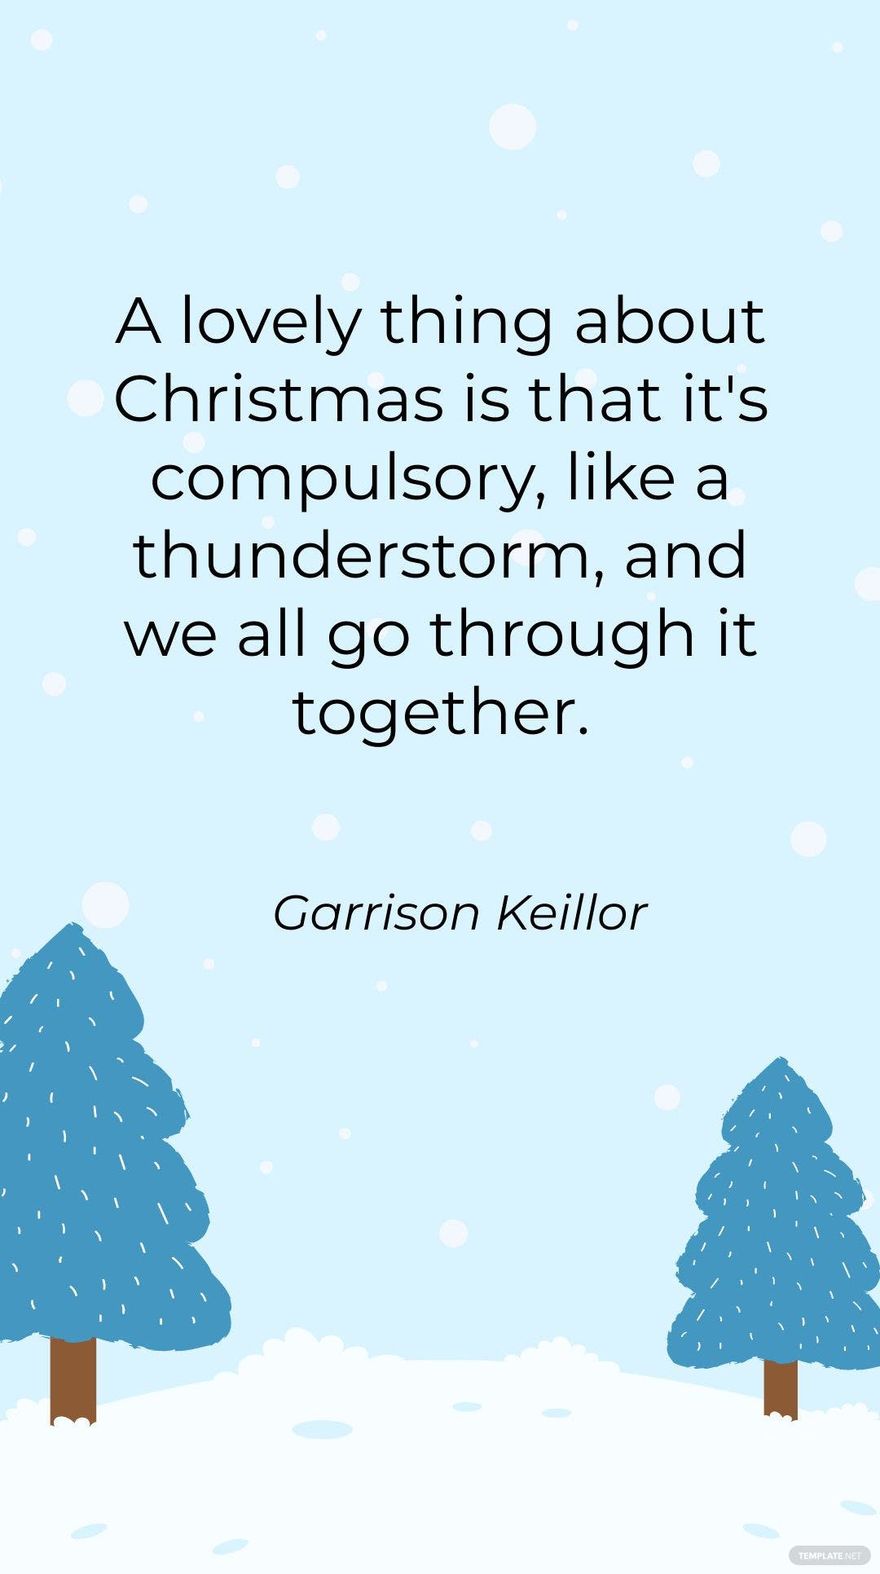 Garrison Keillor - A lovely thing about Christmas is that it's compulsory, like a thunderstorm, and we all go through it together.